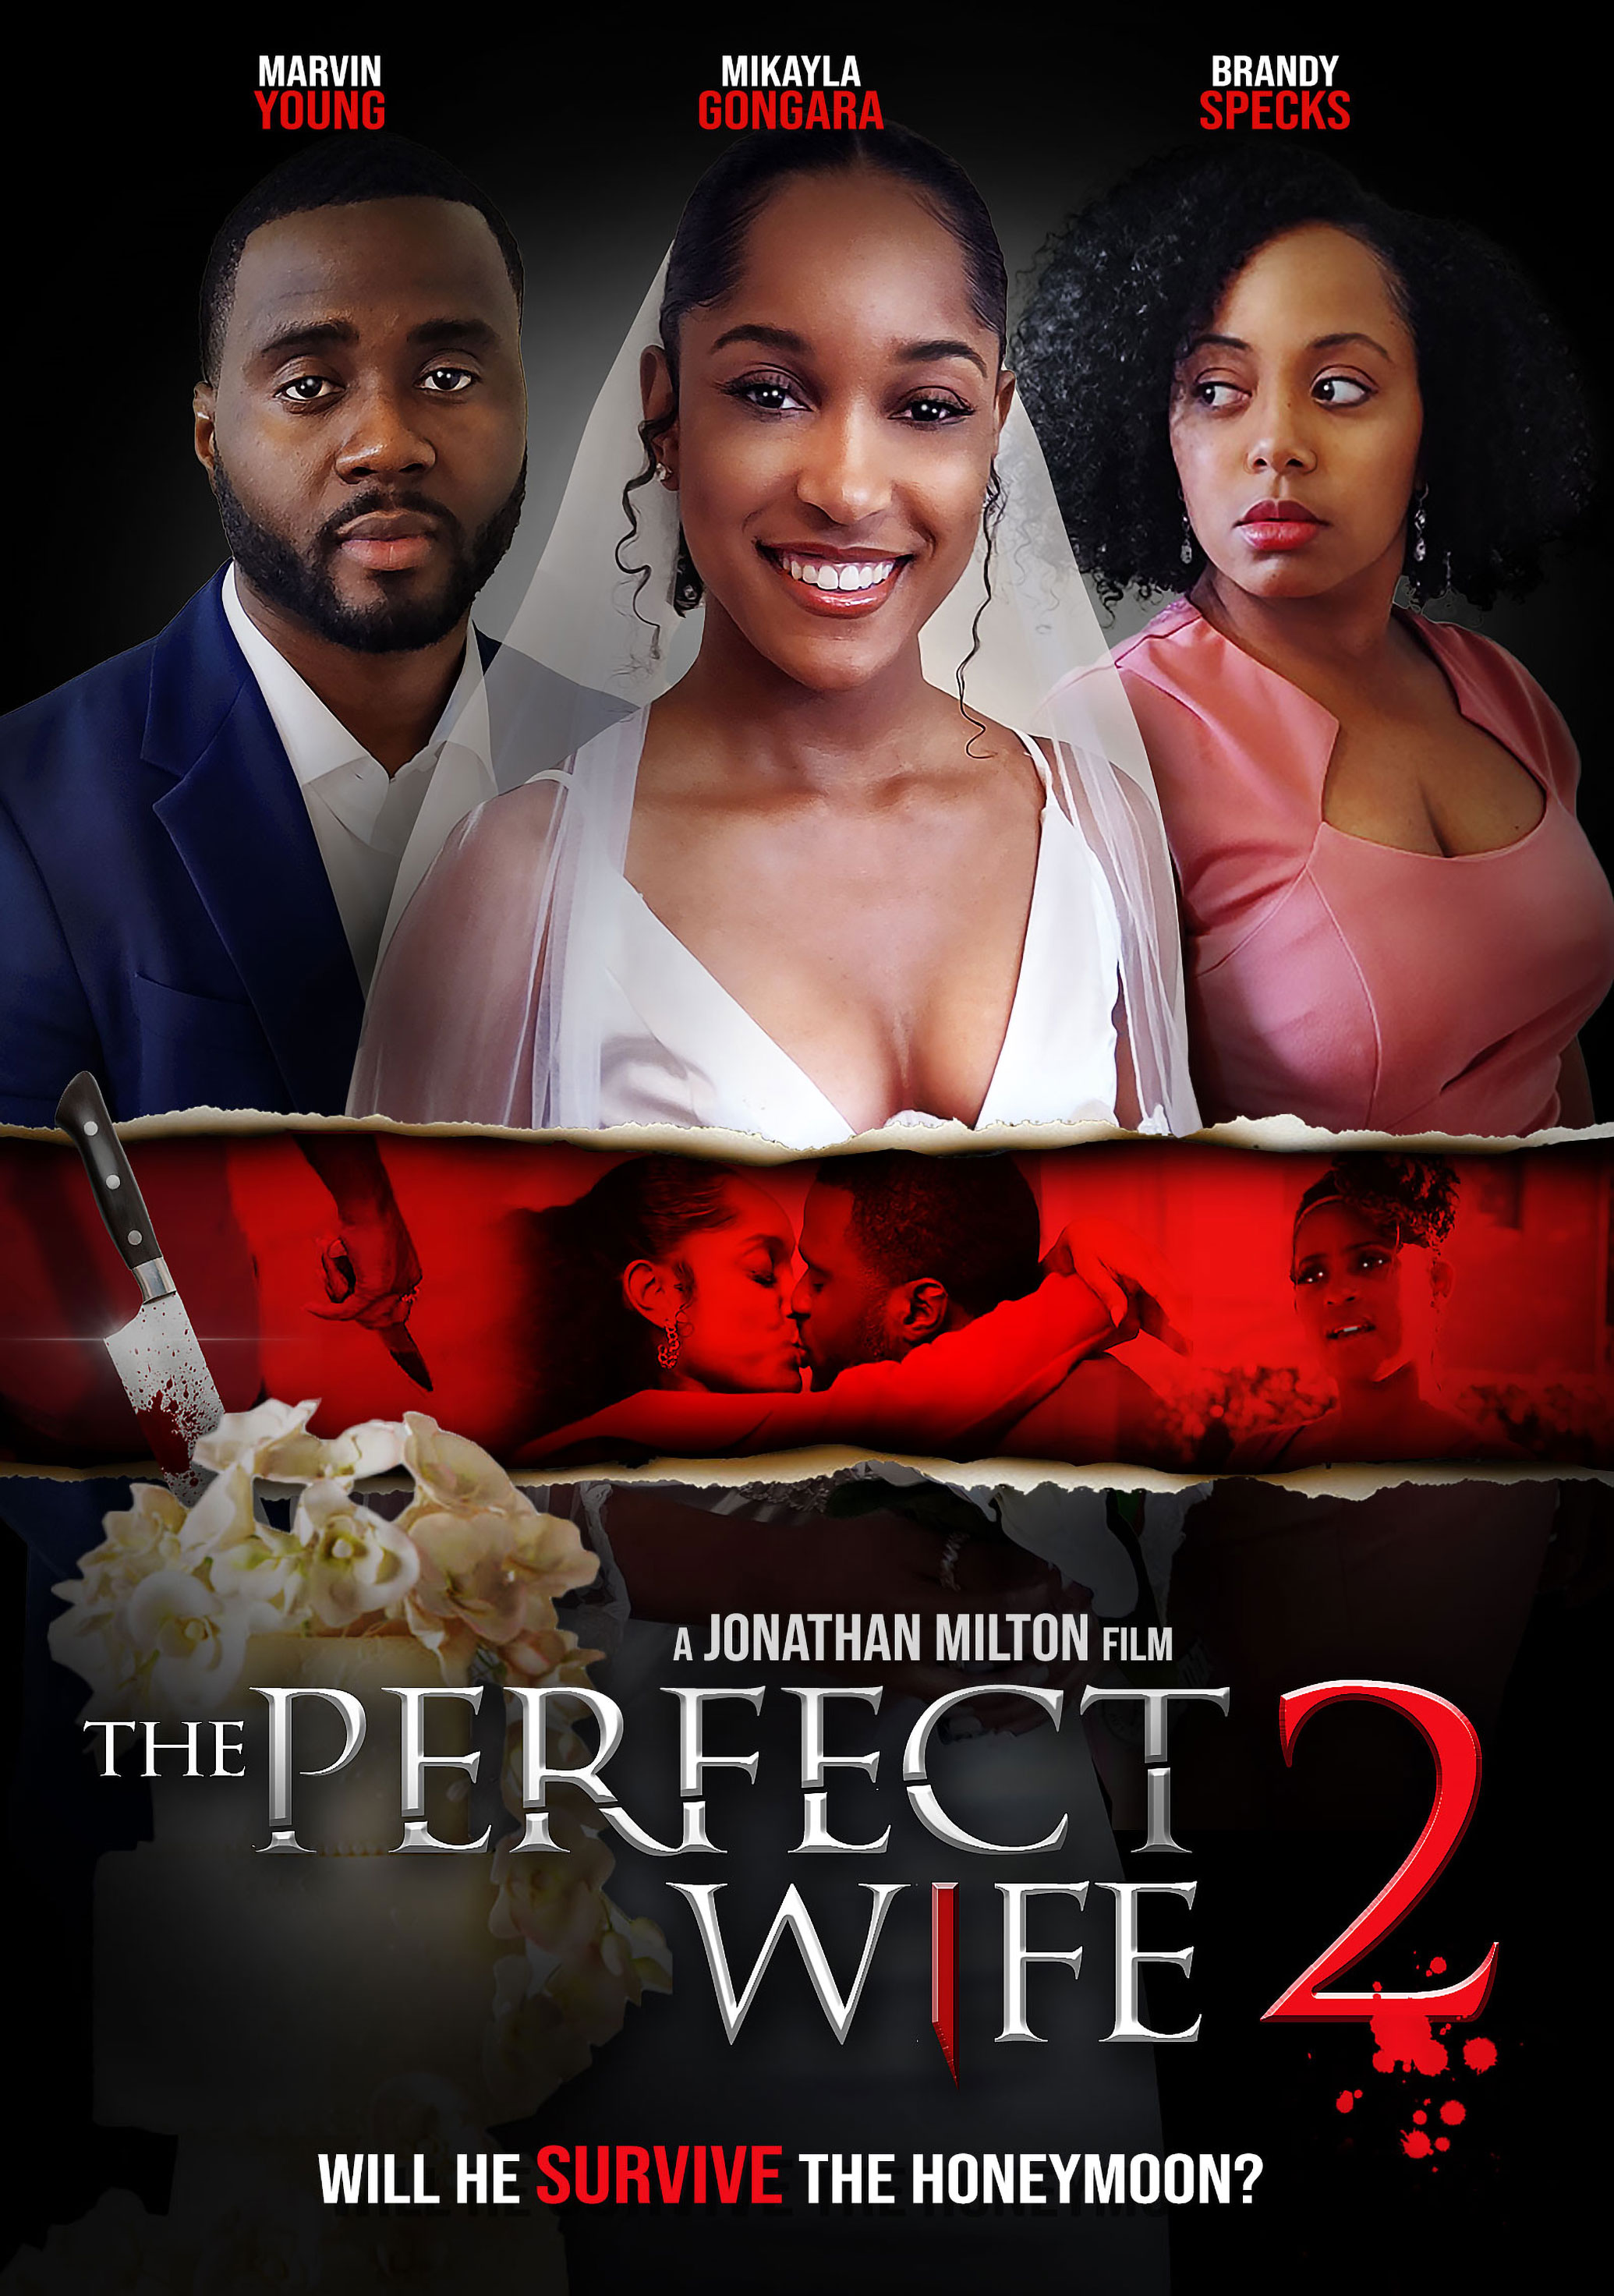 The Perfect Wife 2 (2021) Thriller, Directed By Jonathan Milton pic